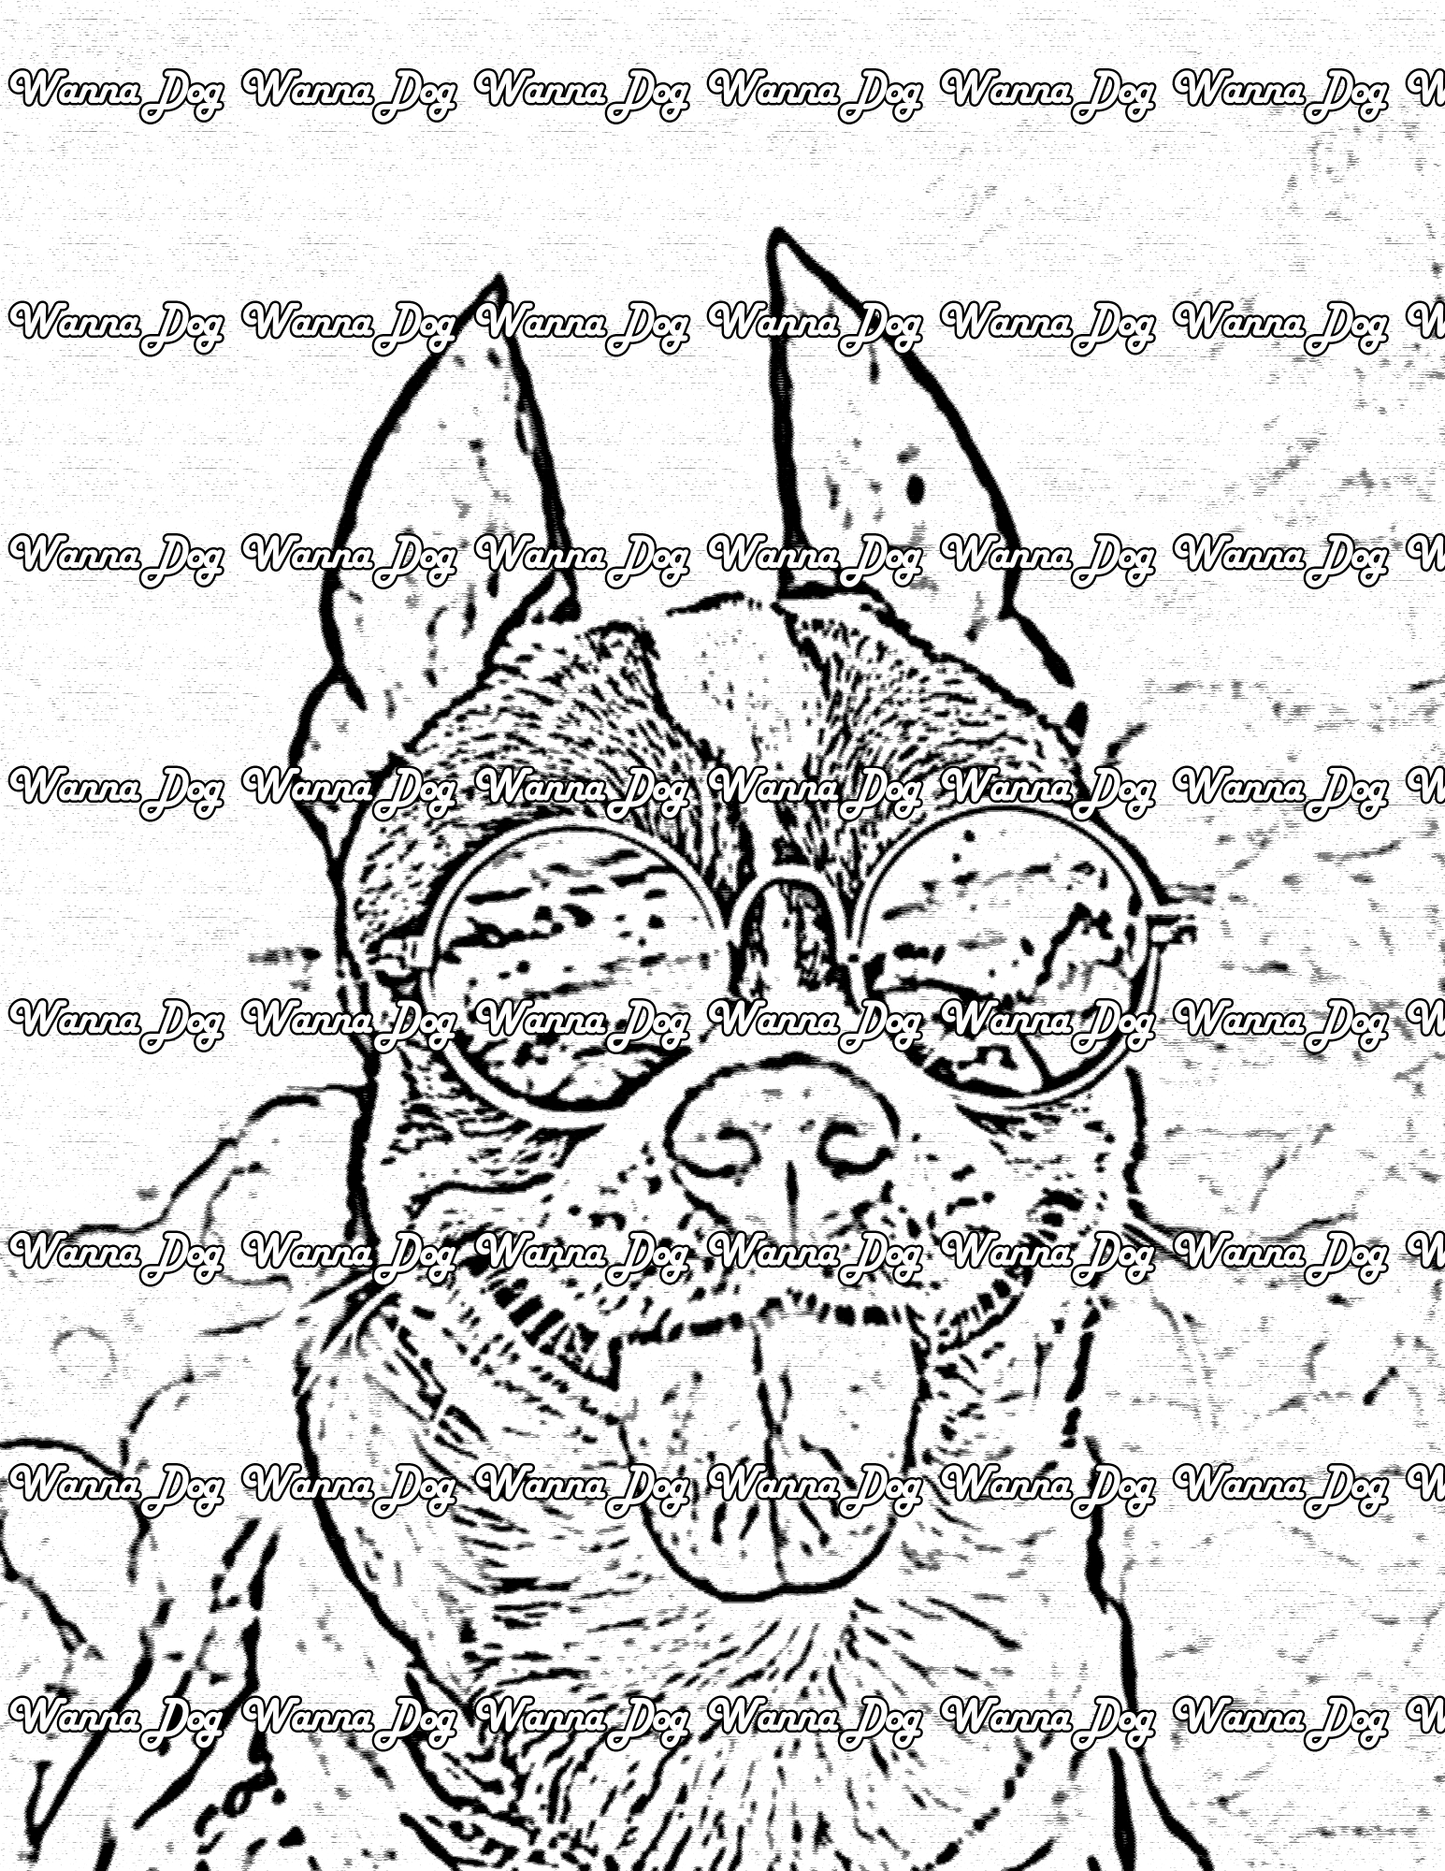 Chihuahua Coloring Page of a Chihuahua with their tongue out and sunglasses